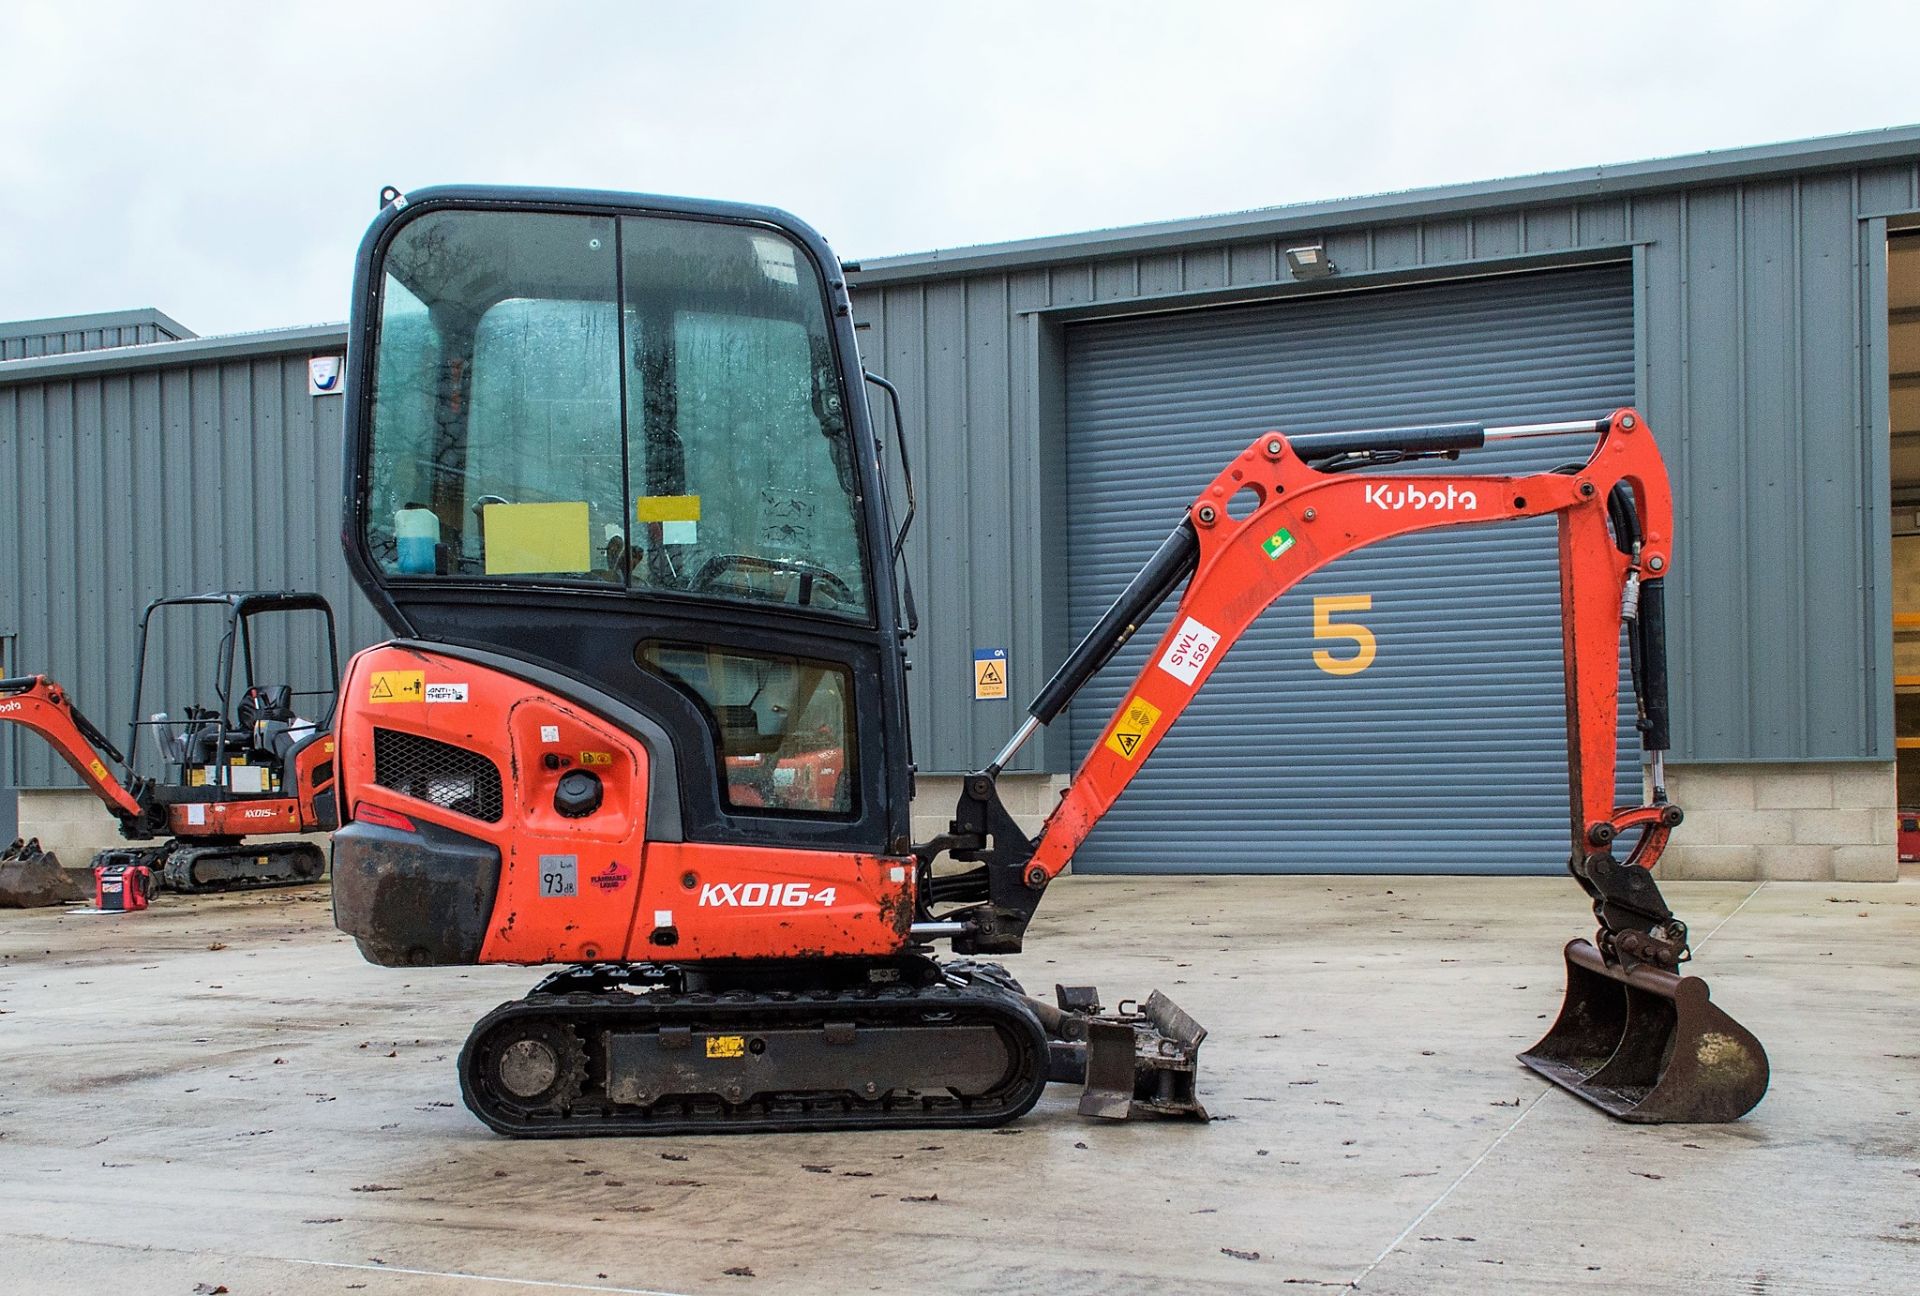 Kubota KX016-4 1.5 tonne rubber tracked excavator Year: 2014 S/N: 57529 Recorded Hours: 2638 - Image 8 of 23